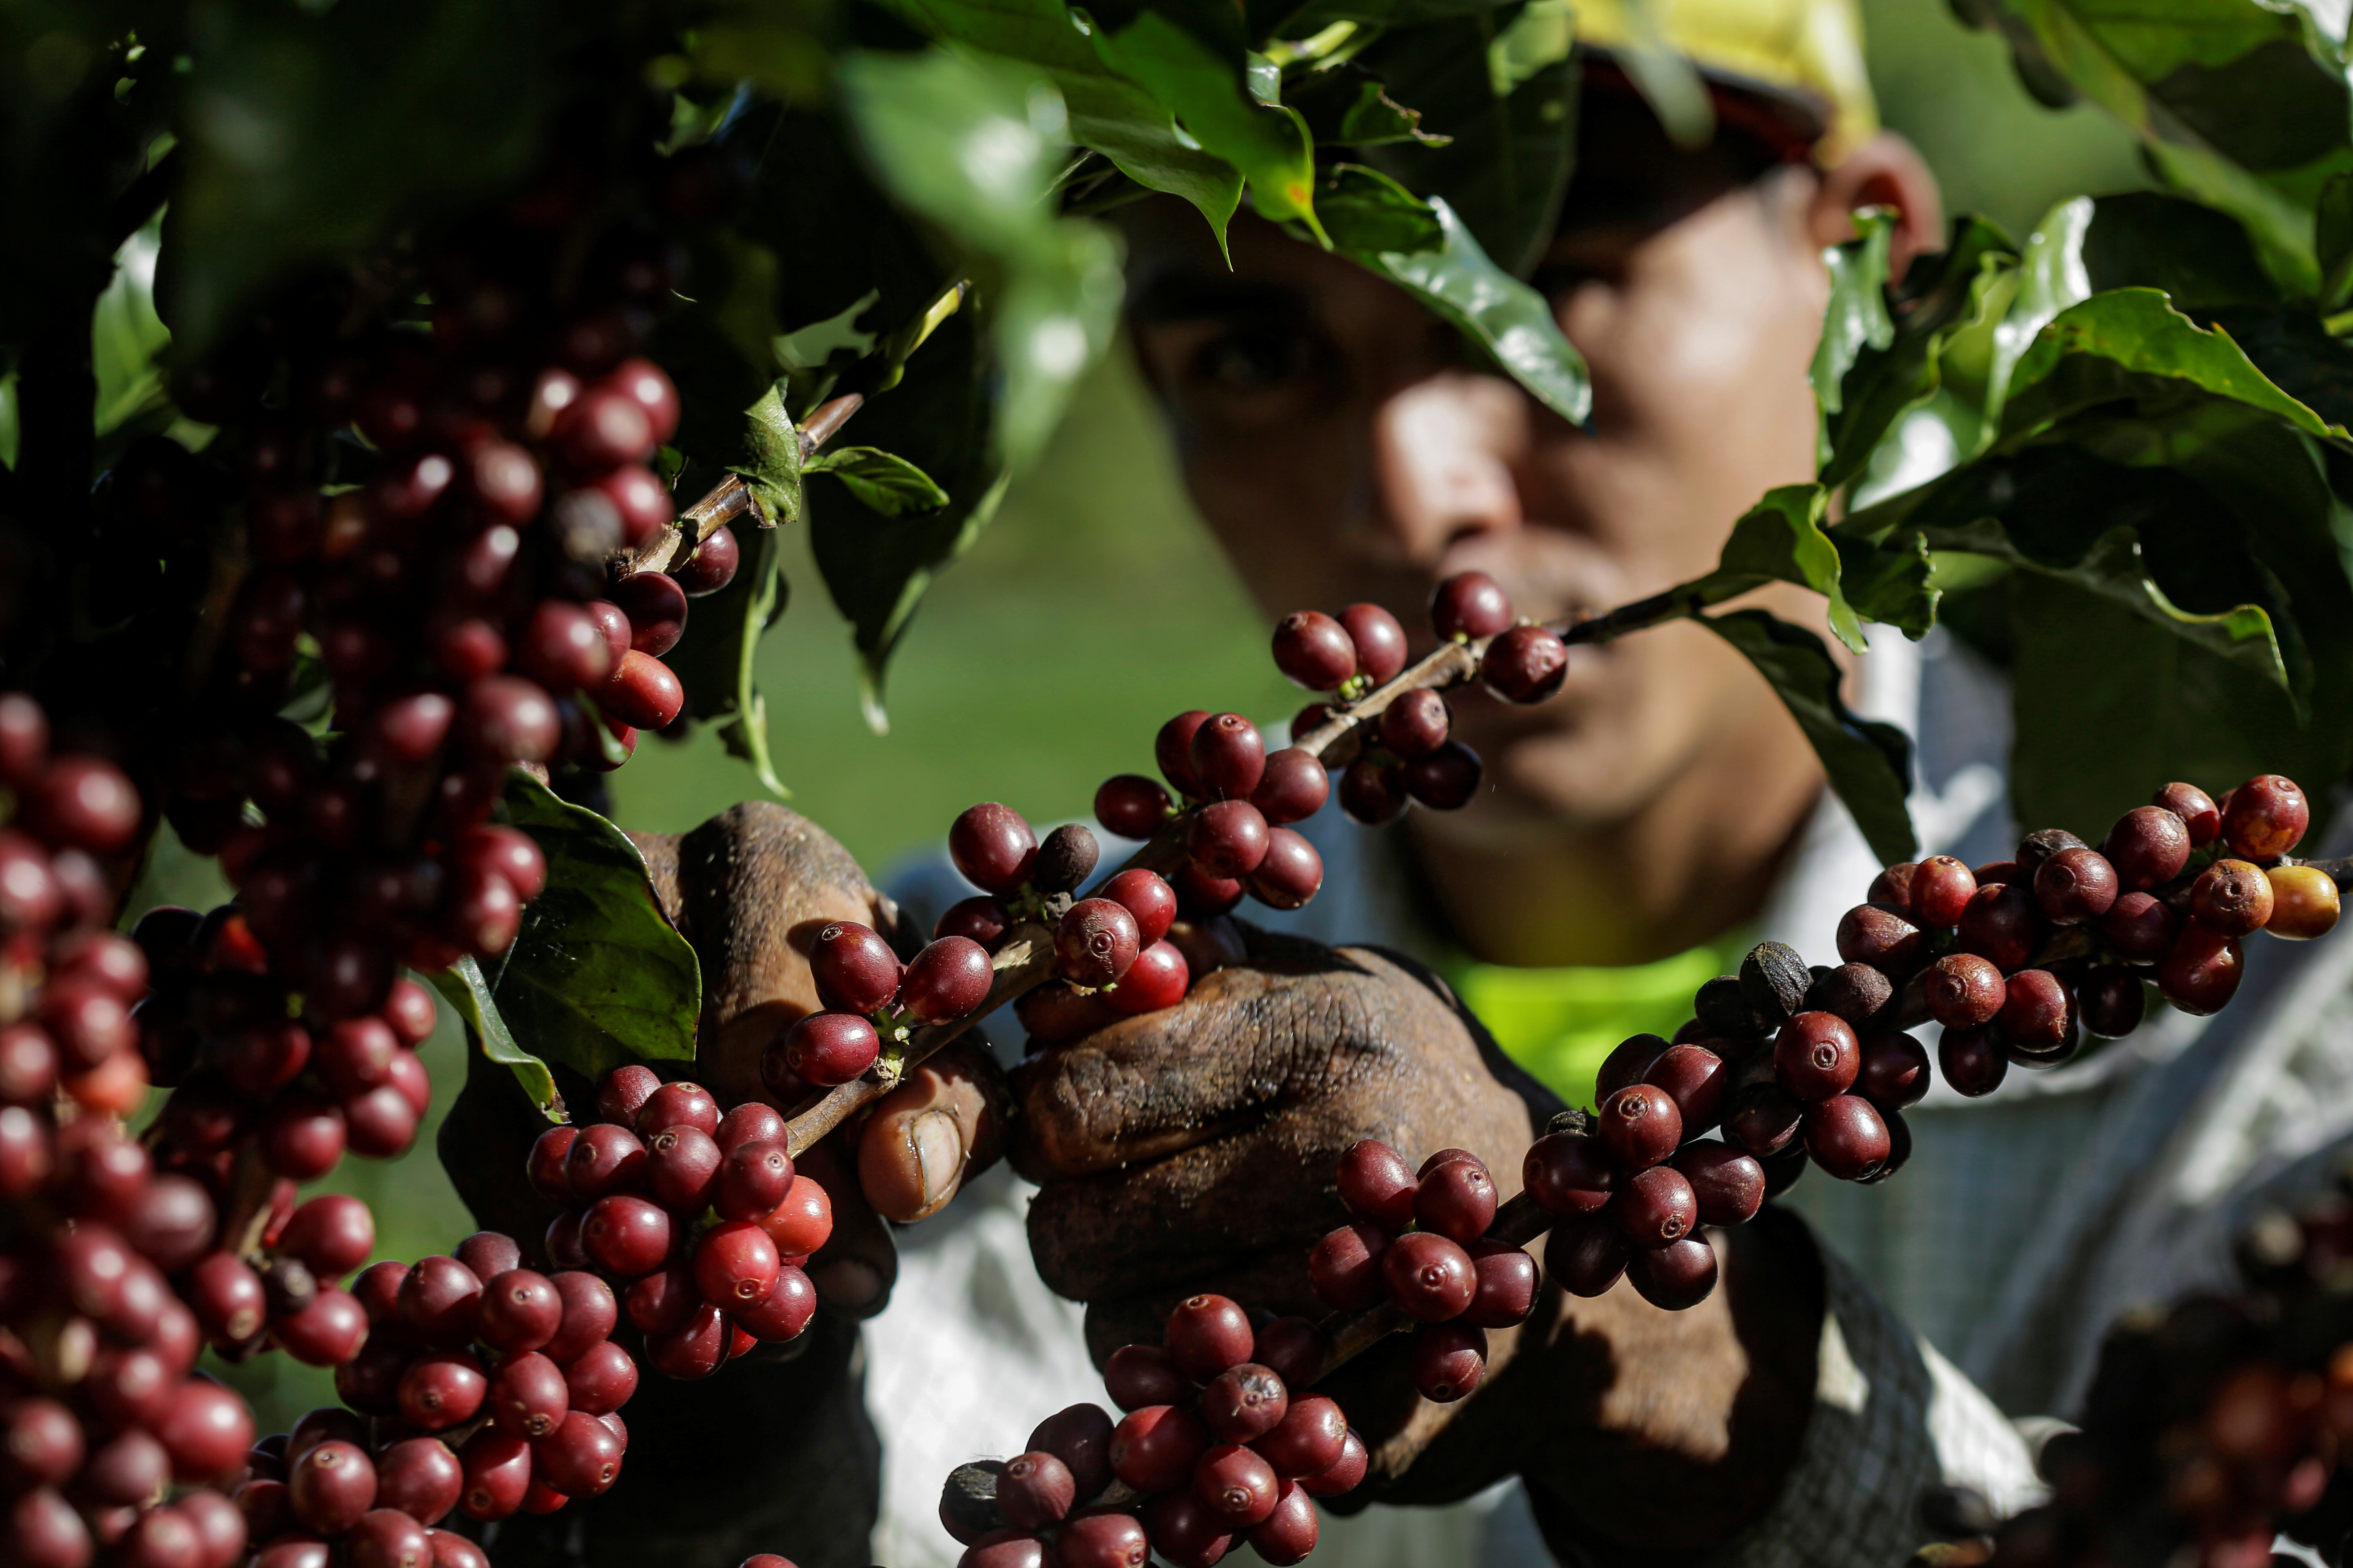 A worker picks ripe coffee cherries at a coffee plantation, in Grecia